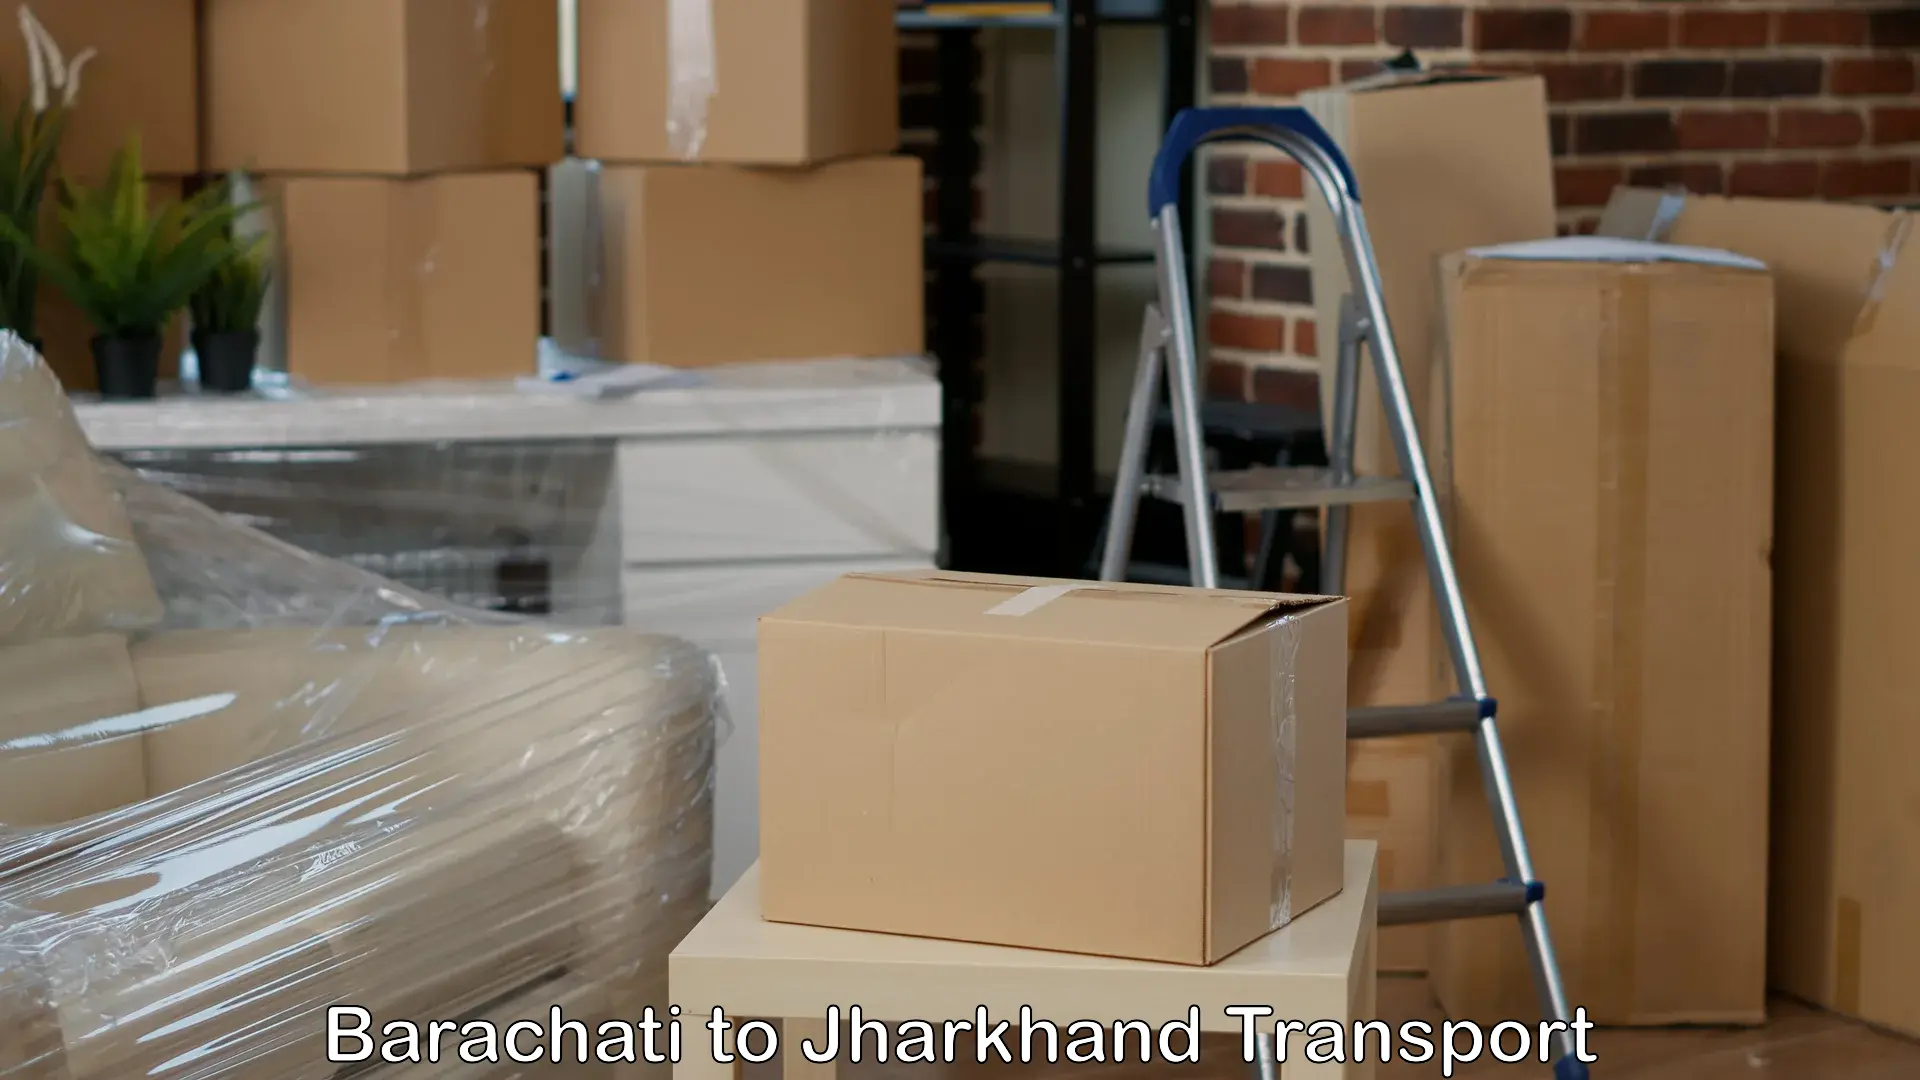 Part load transport service in India Barachati to Ramgarh